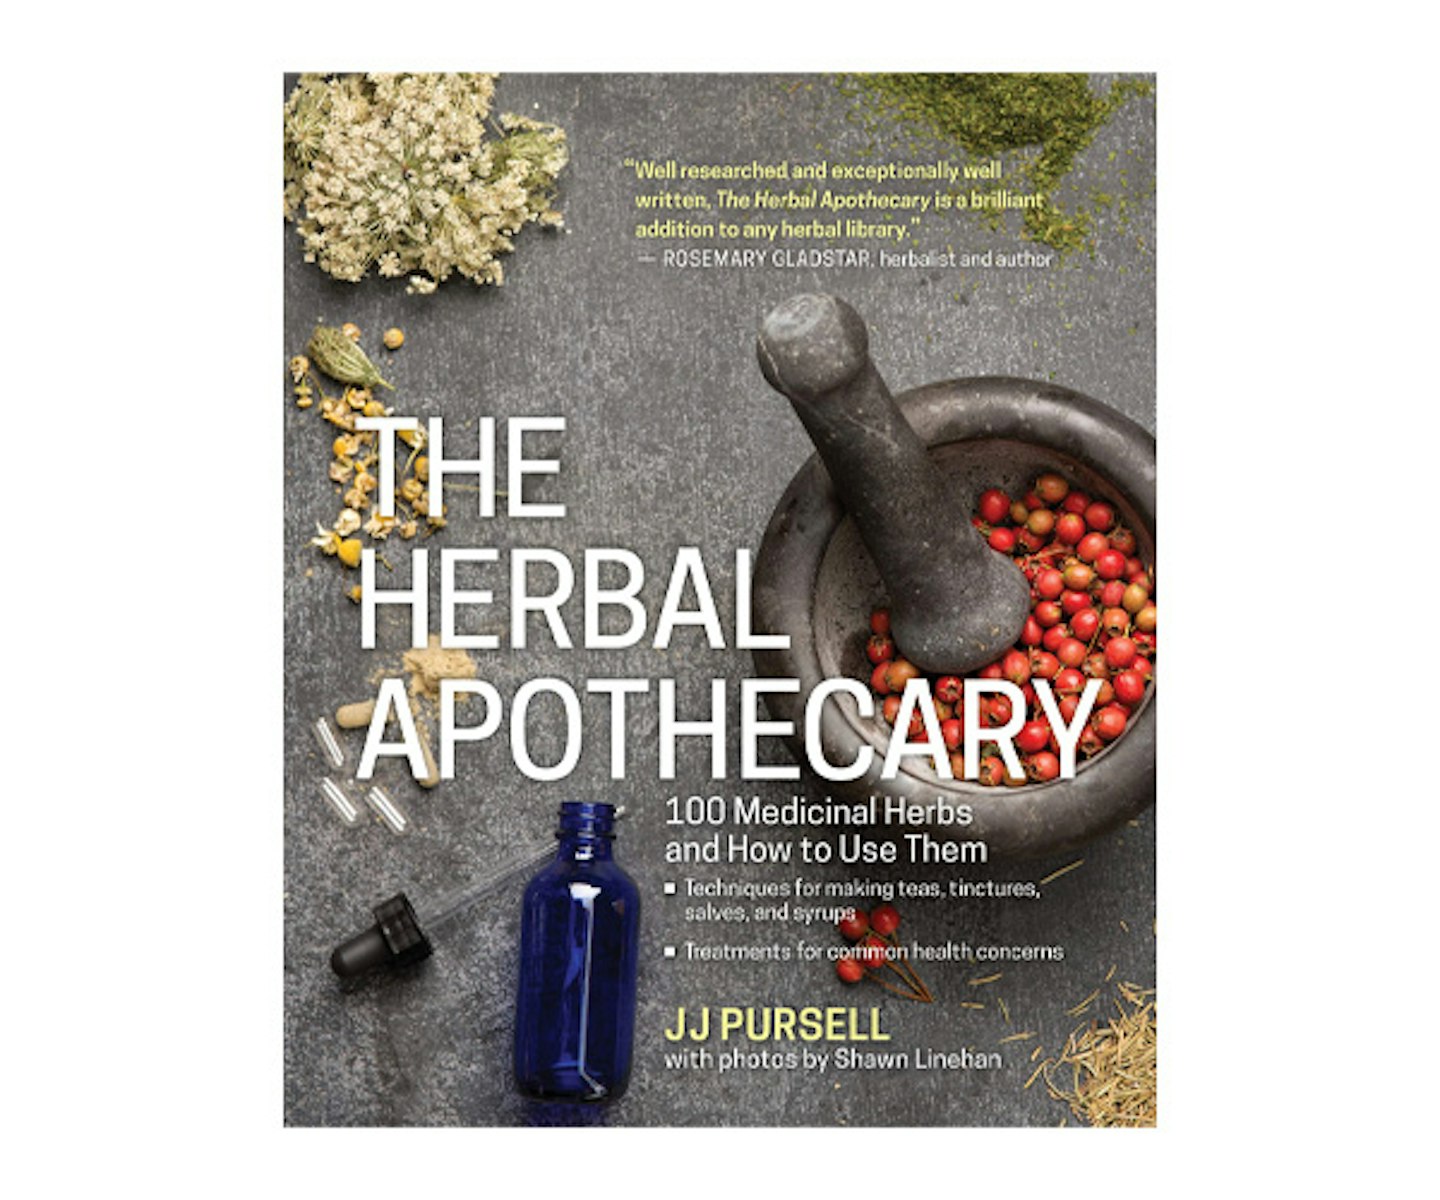 Herbal Apothecary100 Medicinal Herbs and How to Use Them